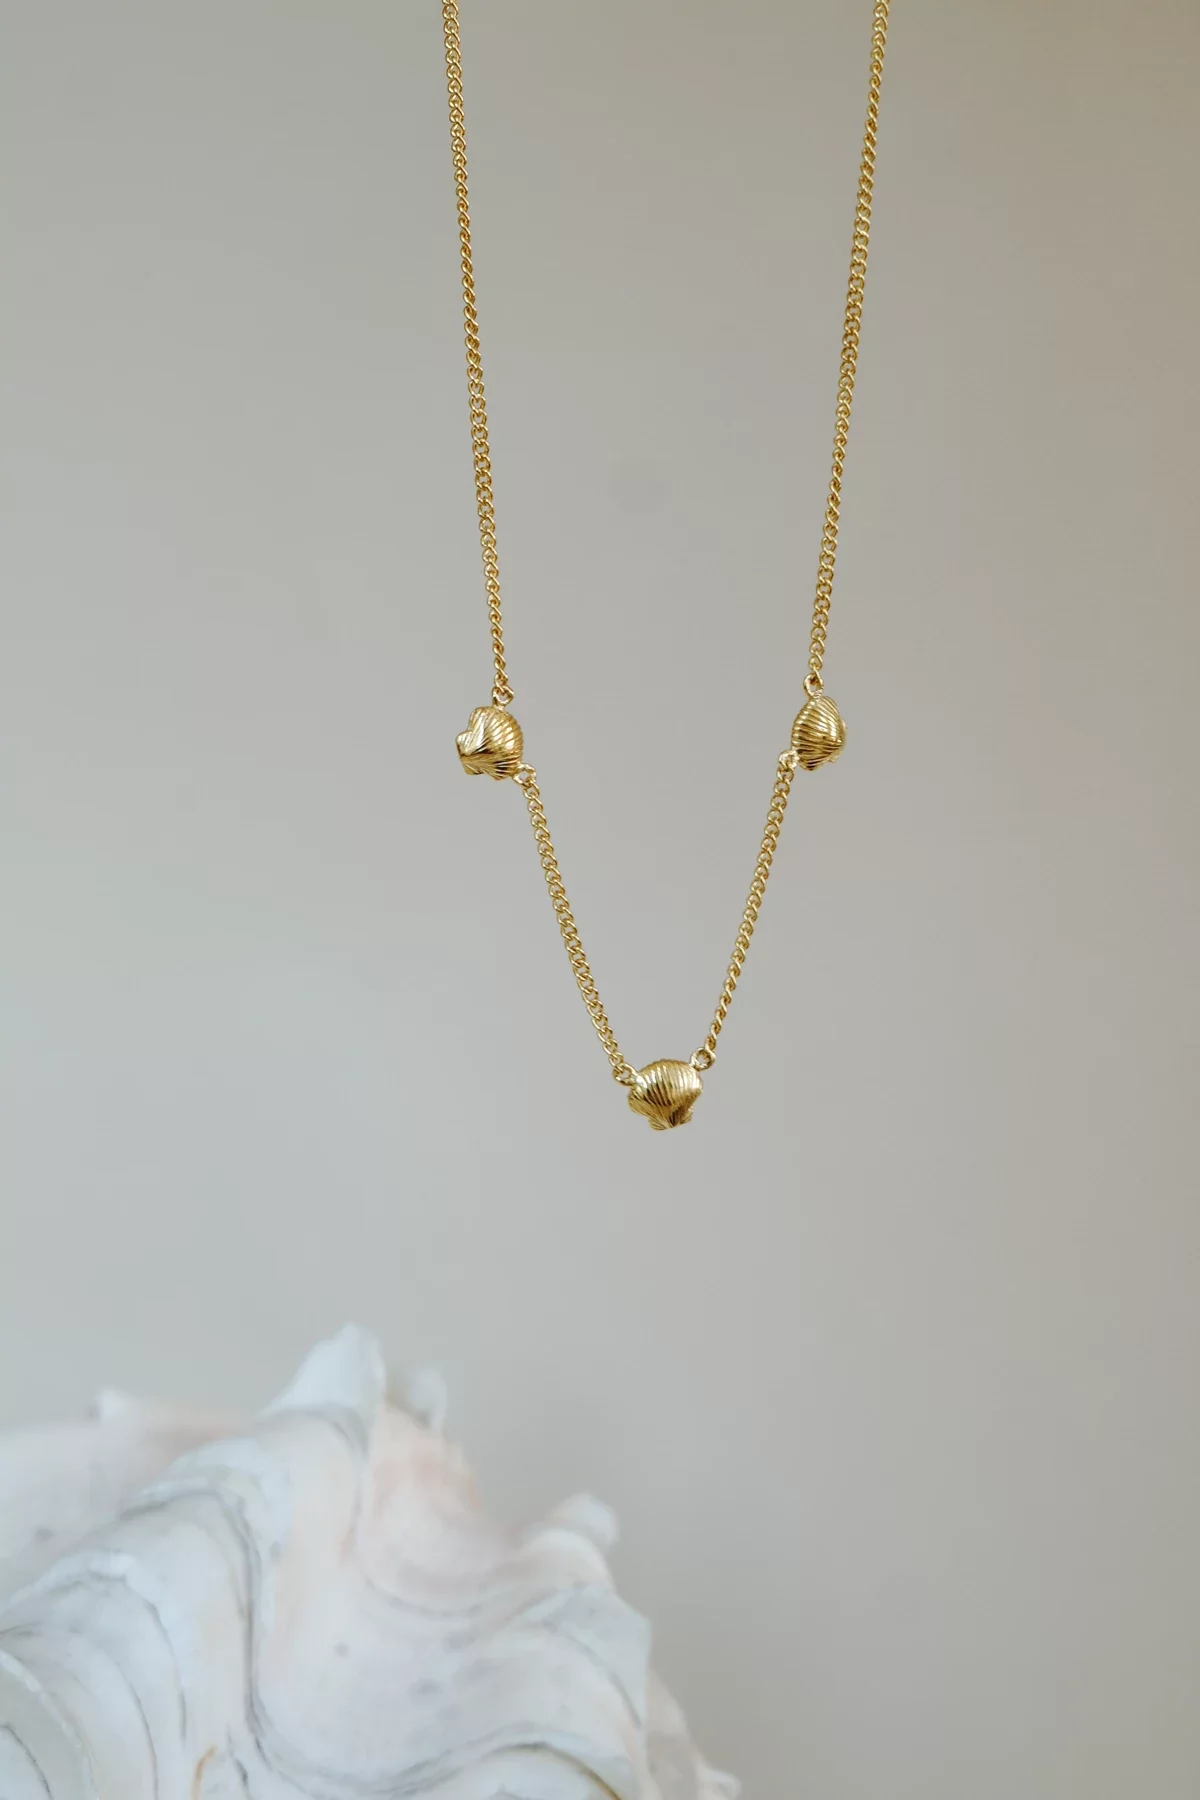 wildthings collectables - Shell necklace gold plated 3